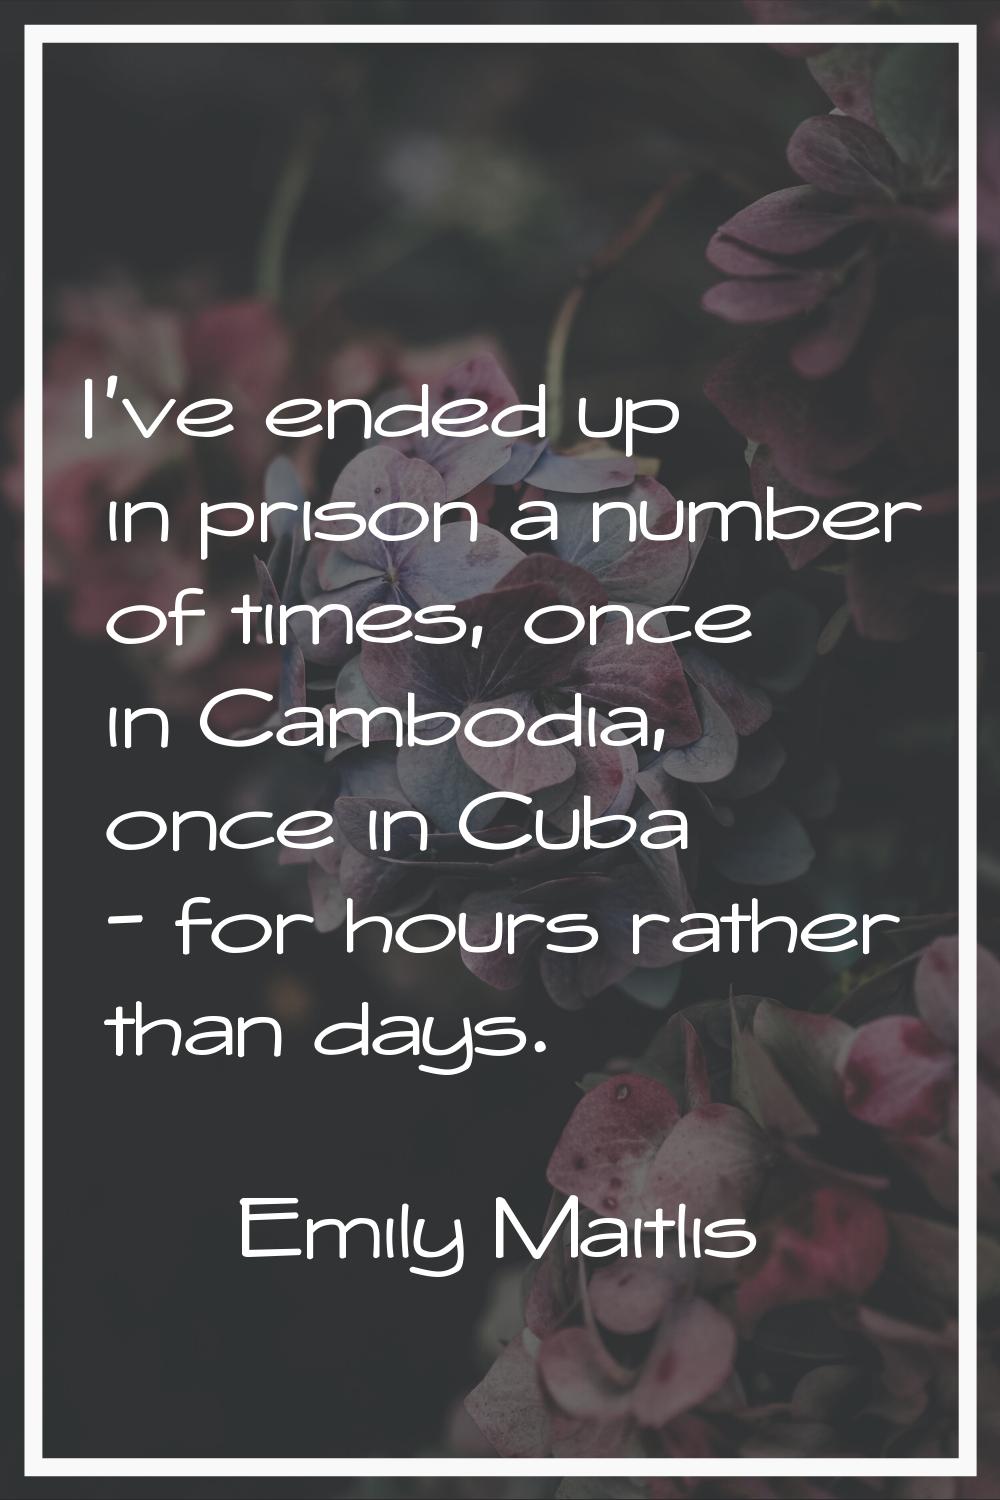 I've ended up in prison a number of times, once in Cambodia, once in Cuba - for hours rather than d